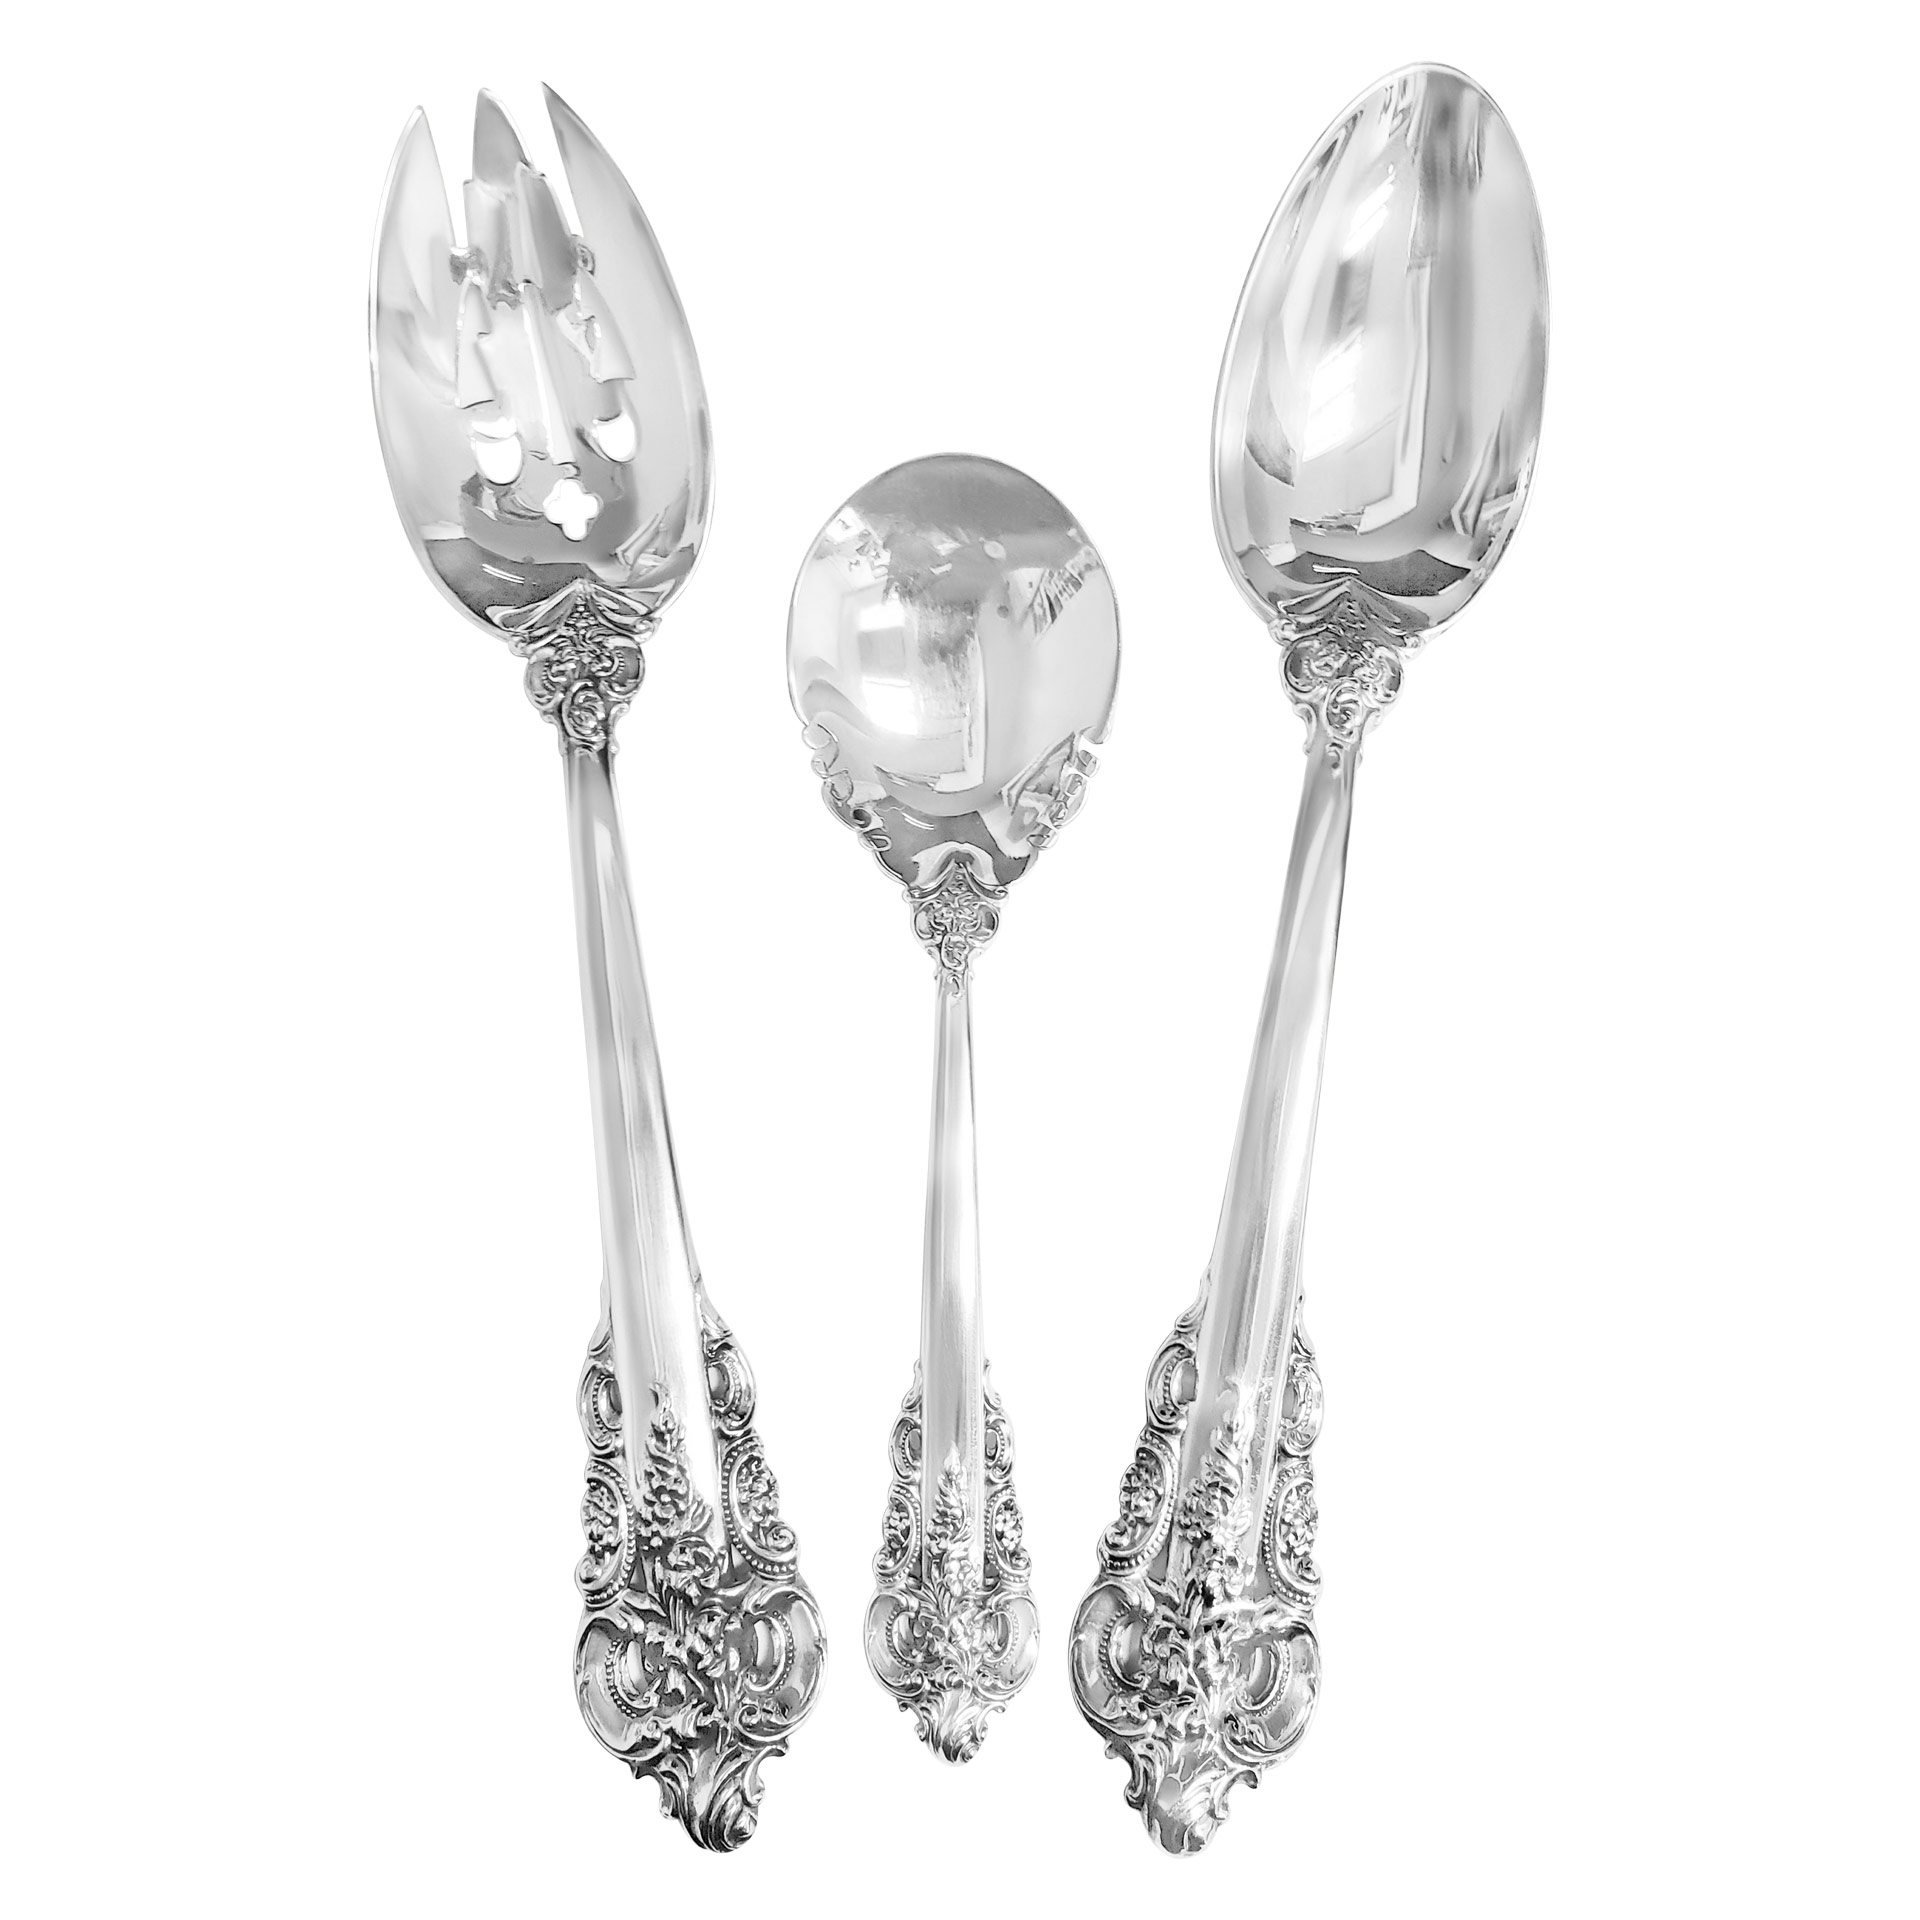 "GRANDE BAROQUE" Sterling Silver Flatware Set. Ptd 1941 by Wallace. 7 place setting for 12 with 8 serving pieces. Over 3500 grams sterling silver. image 3